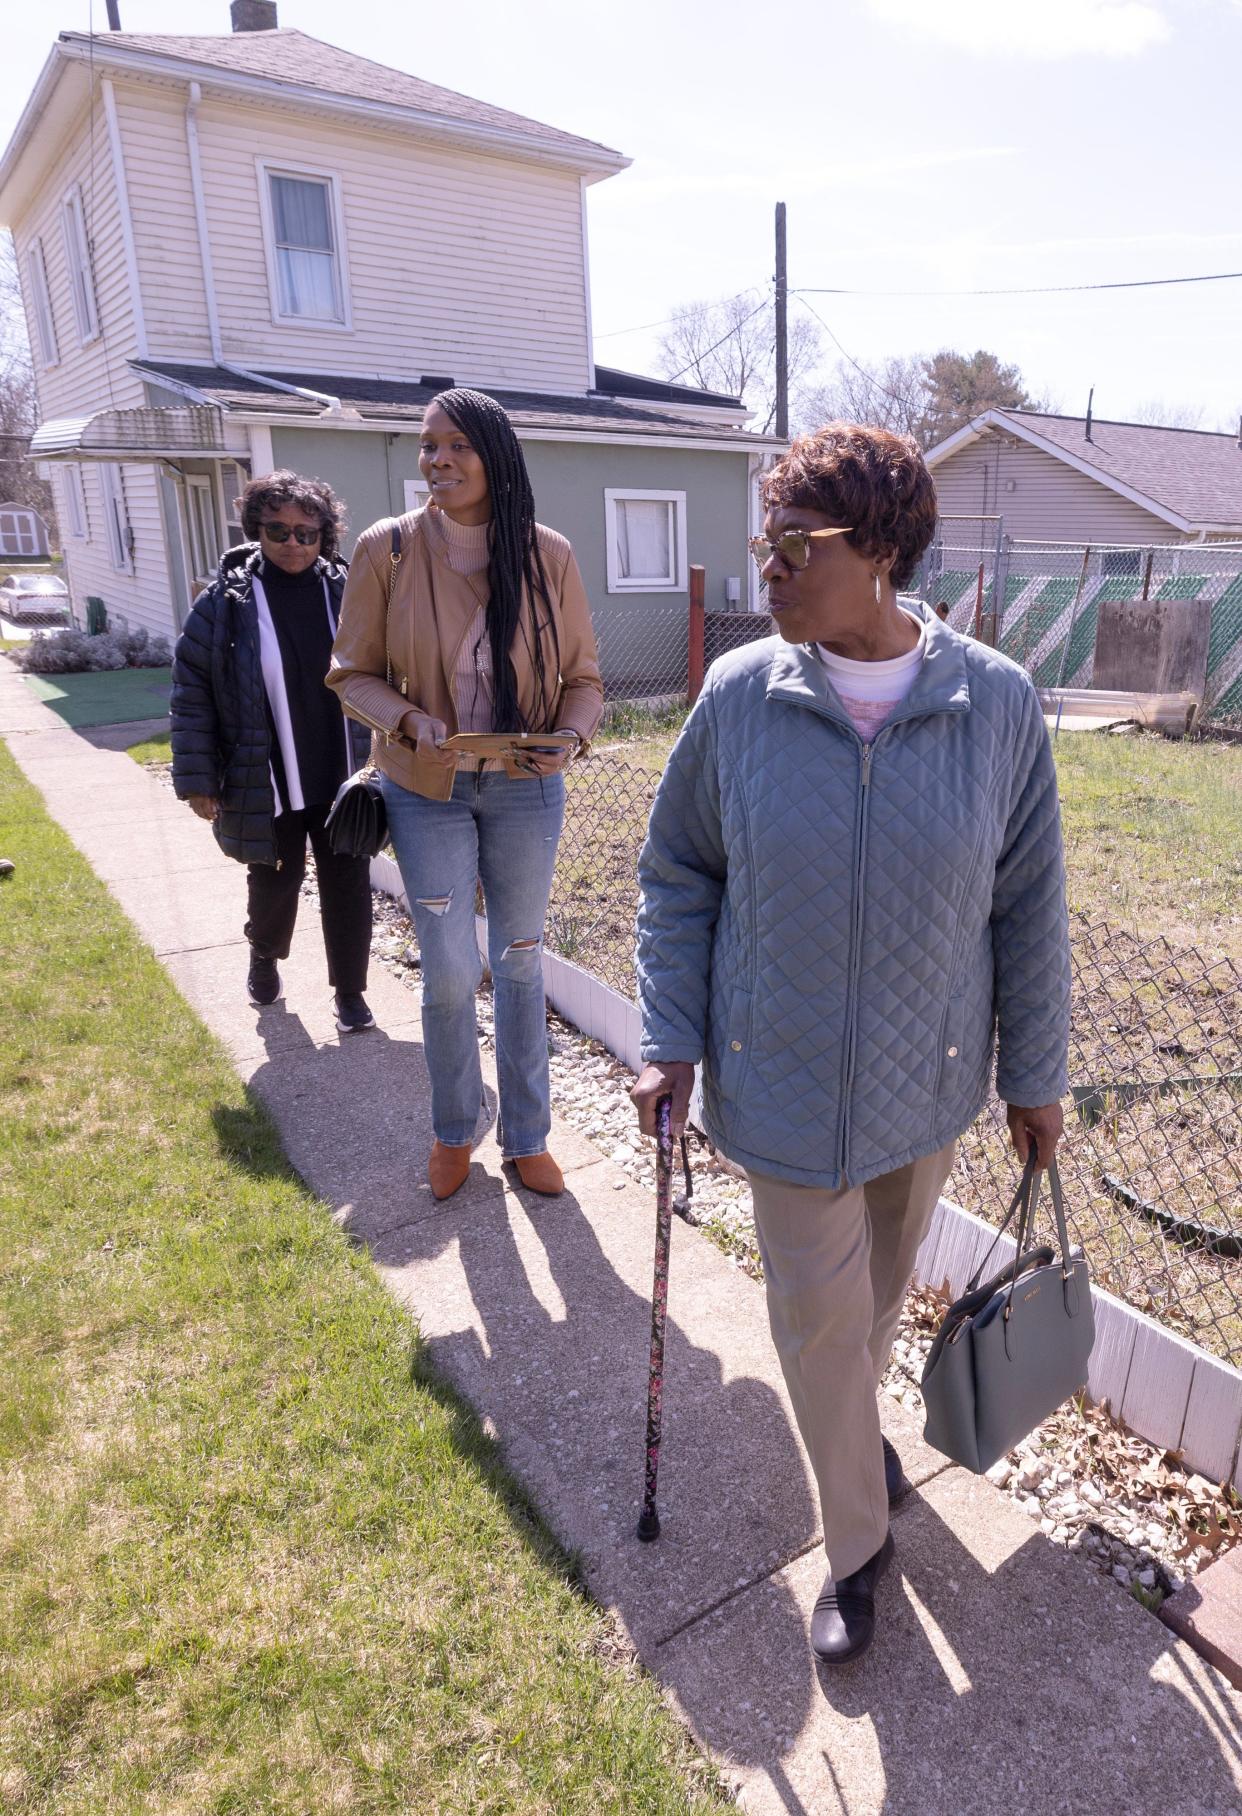 From left, Deborah Johnson-Graham, Kim Manley, and Marie Justice take in the yard and surroundings of their family home in Canton where Habitat for Humanity found the family's hidden heirlooms.